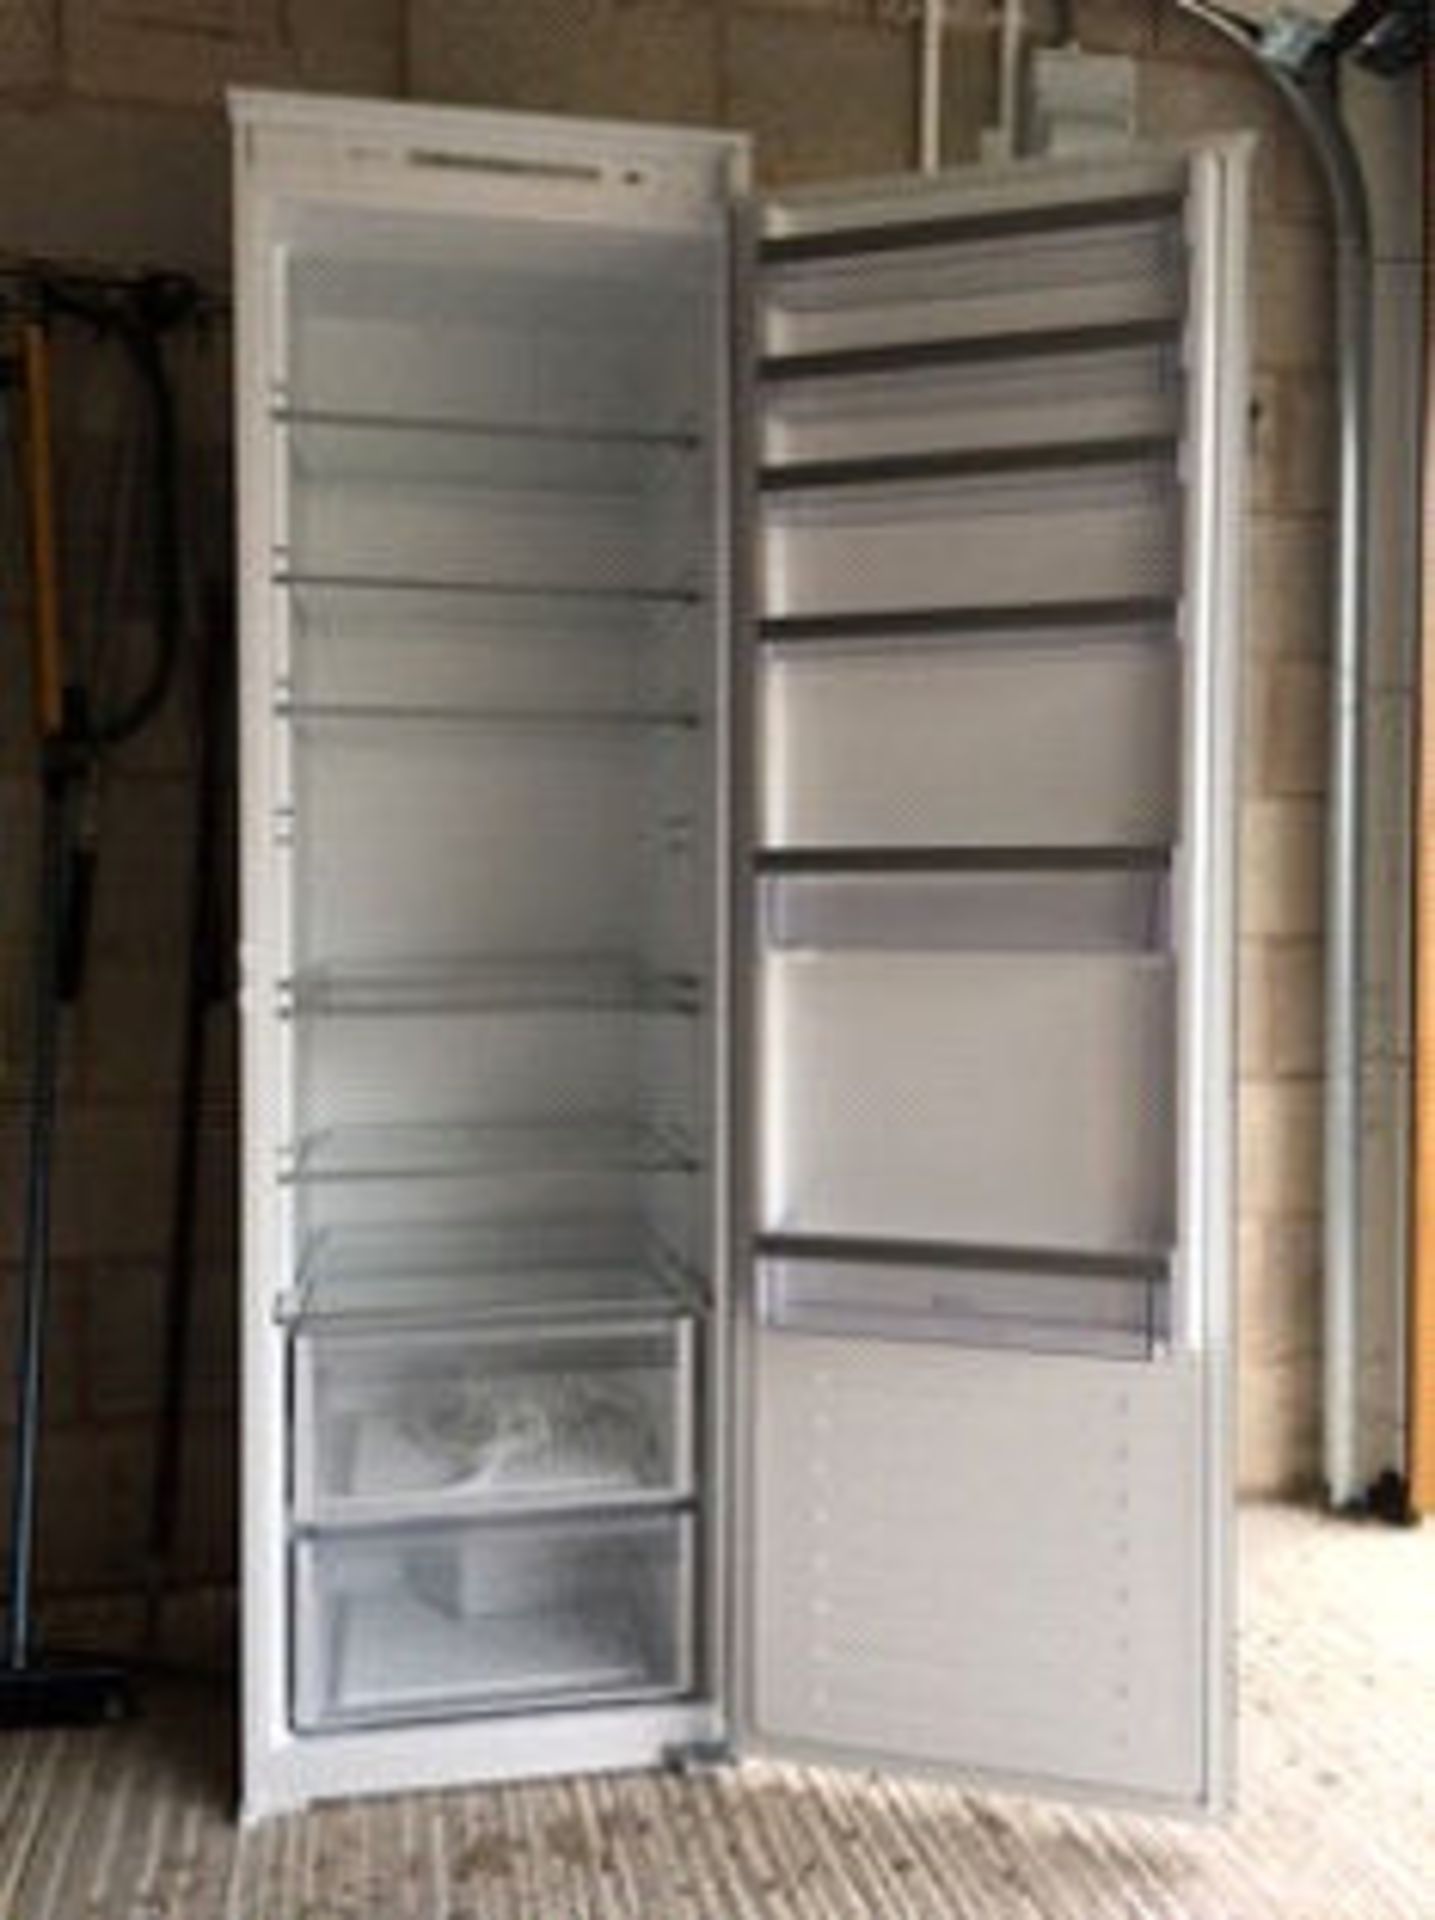 1 x NEFF KI1812S30G Integrated Tall Fridge - Only 6 Months Old - CL252 - Location: Longton, PR4 - NO - Image 3 of 6